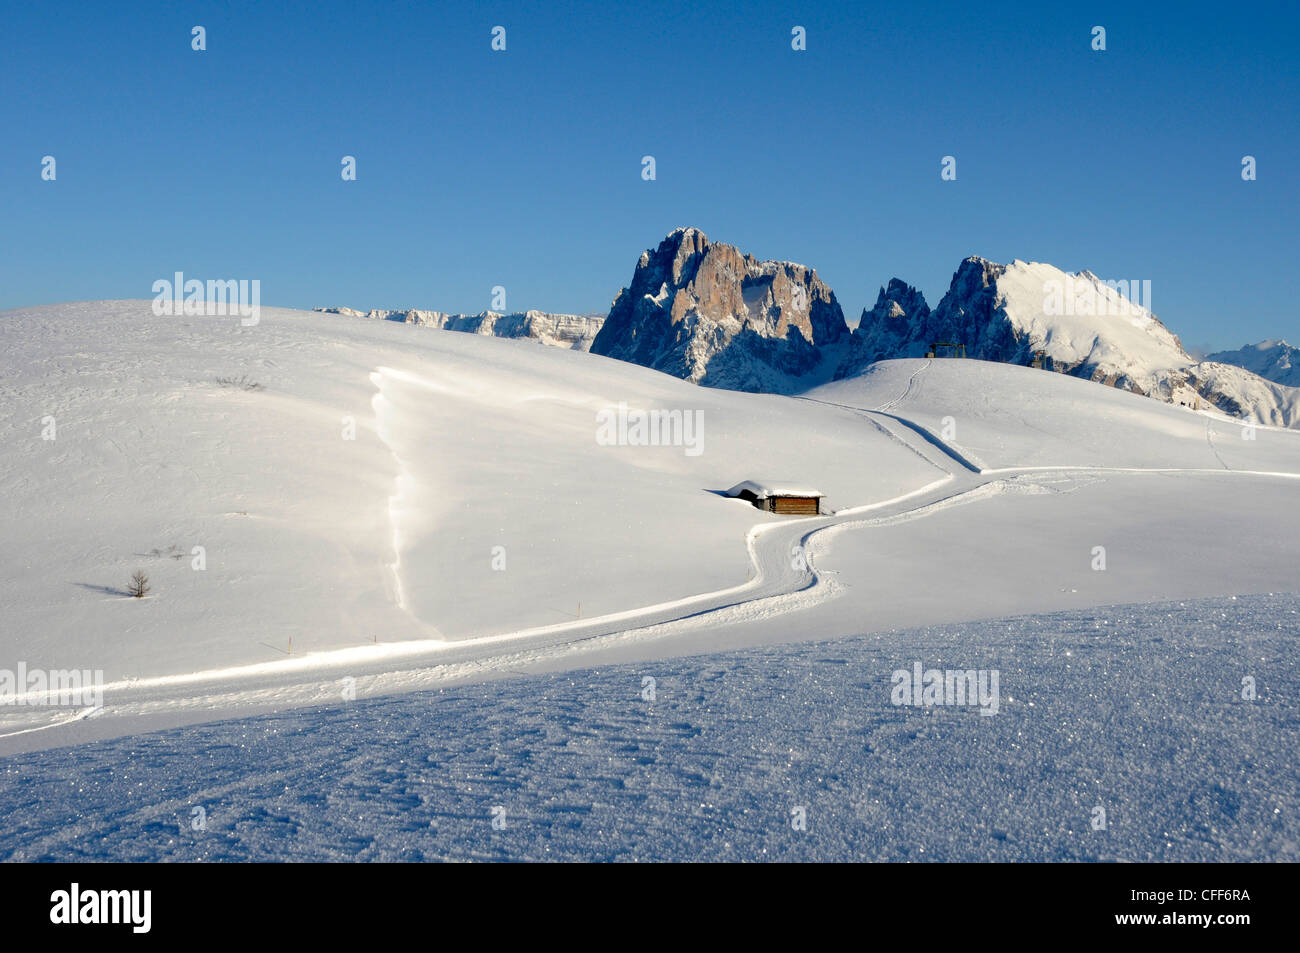 Cross country skiing trail in sunlit winter landscape, Alpe di Siusi, Puflatsch, Alto Adige, South Tyrol, Italy, Europe Stock Photo